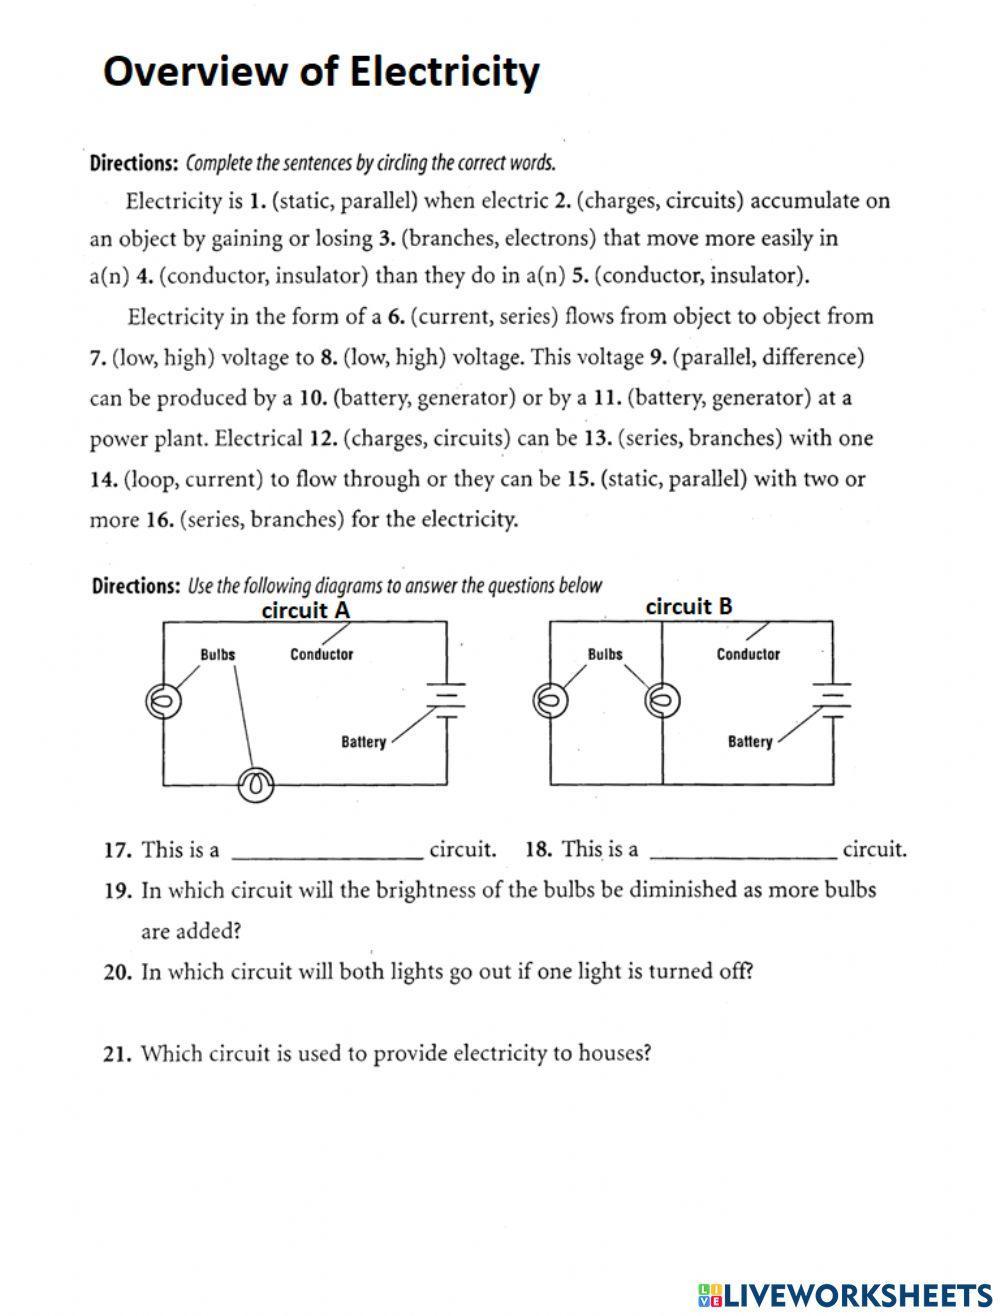 PS-17-04-Electric Circuits